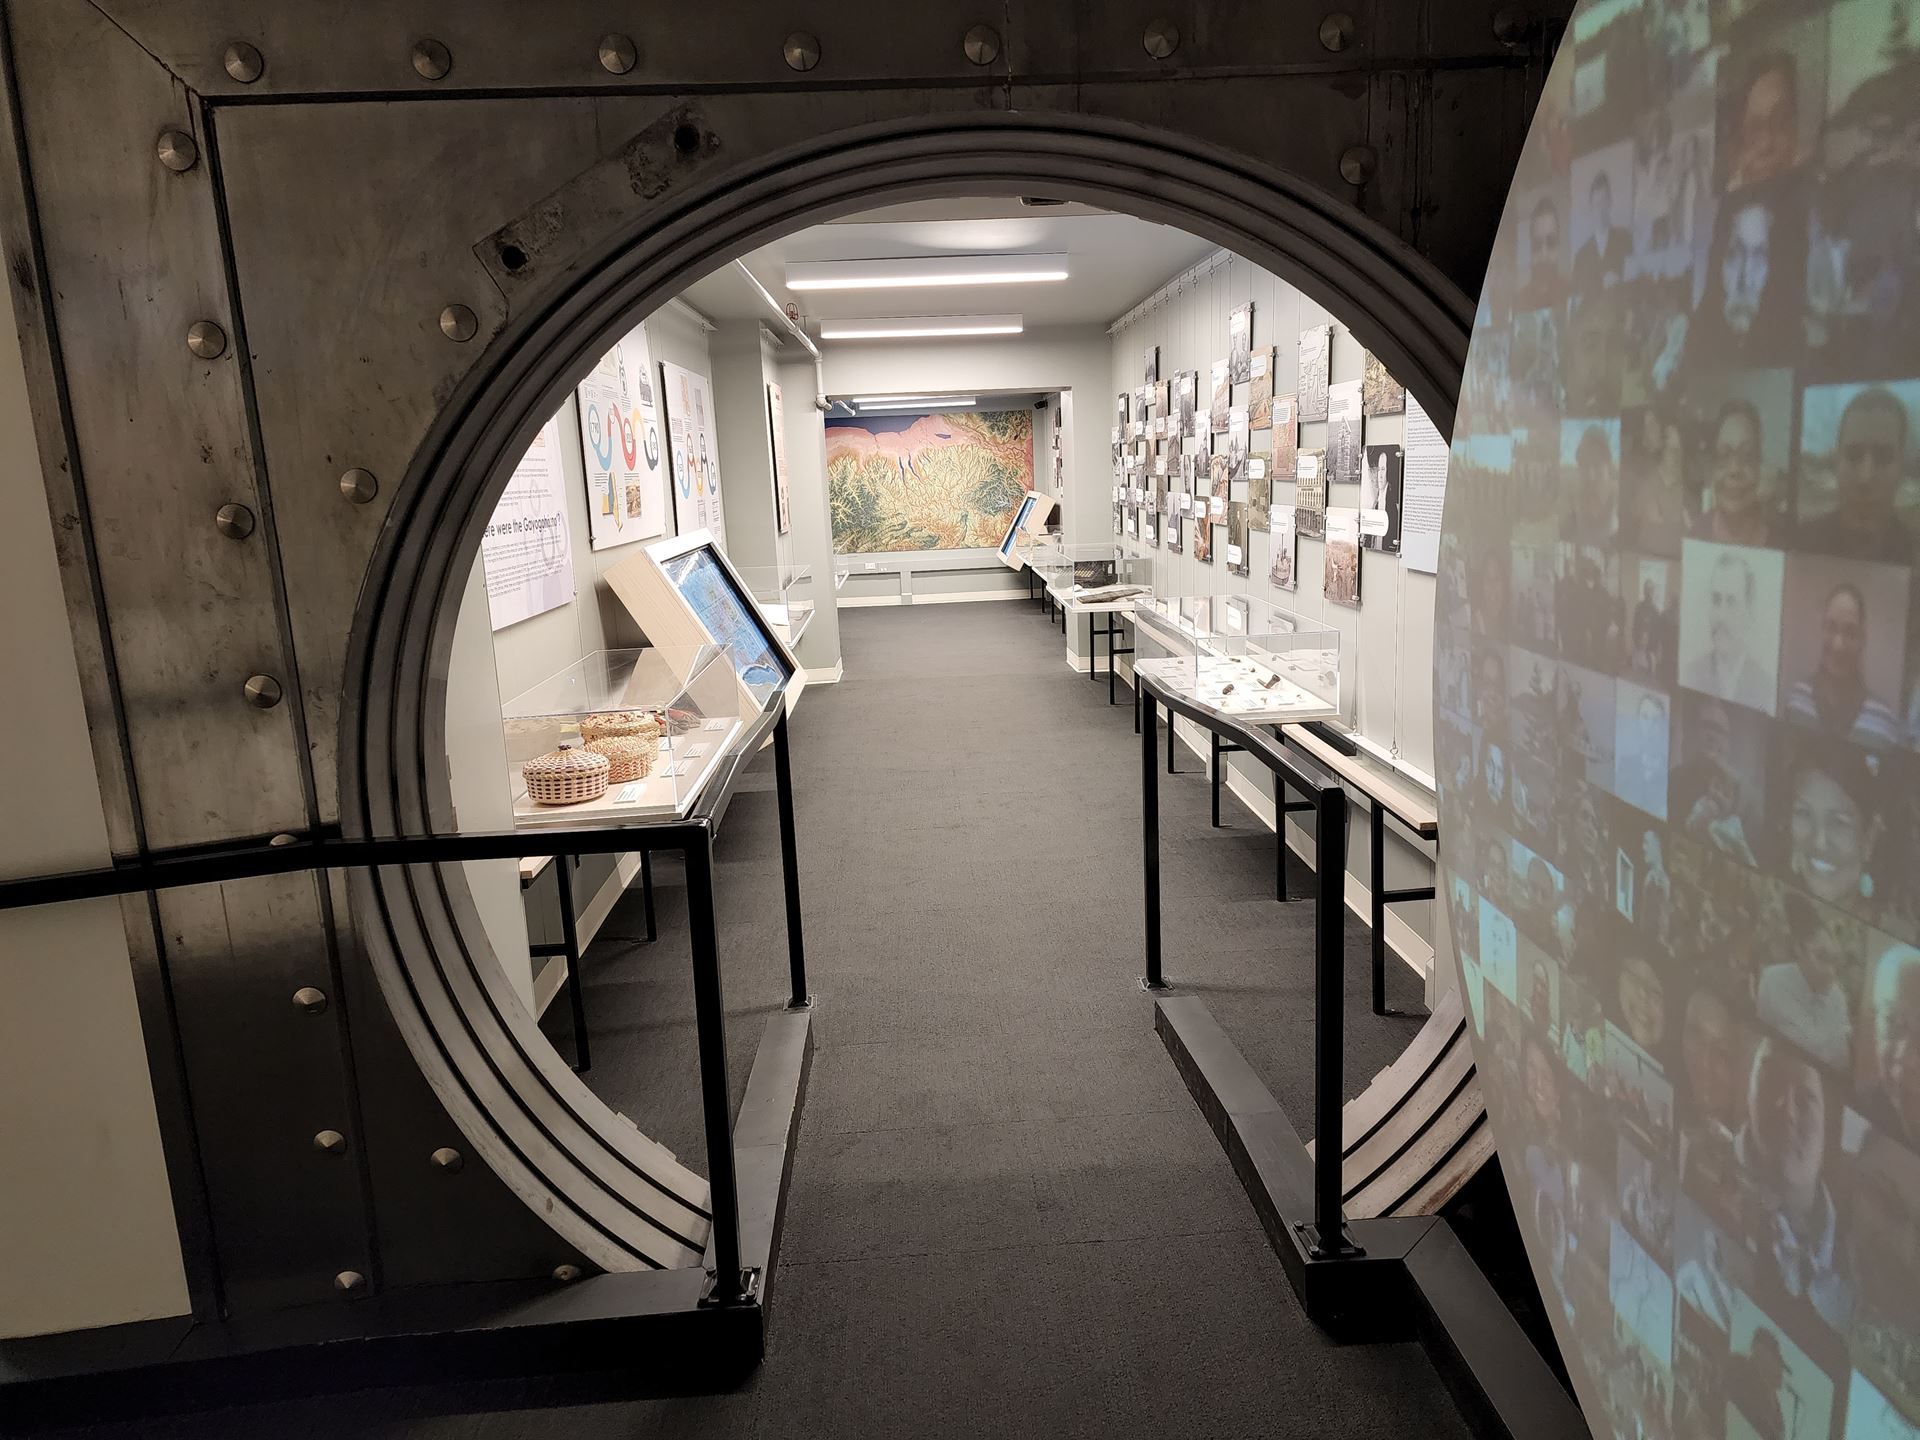 A rectangular image of the entrance to the "Passage Through Time" exhibit.